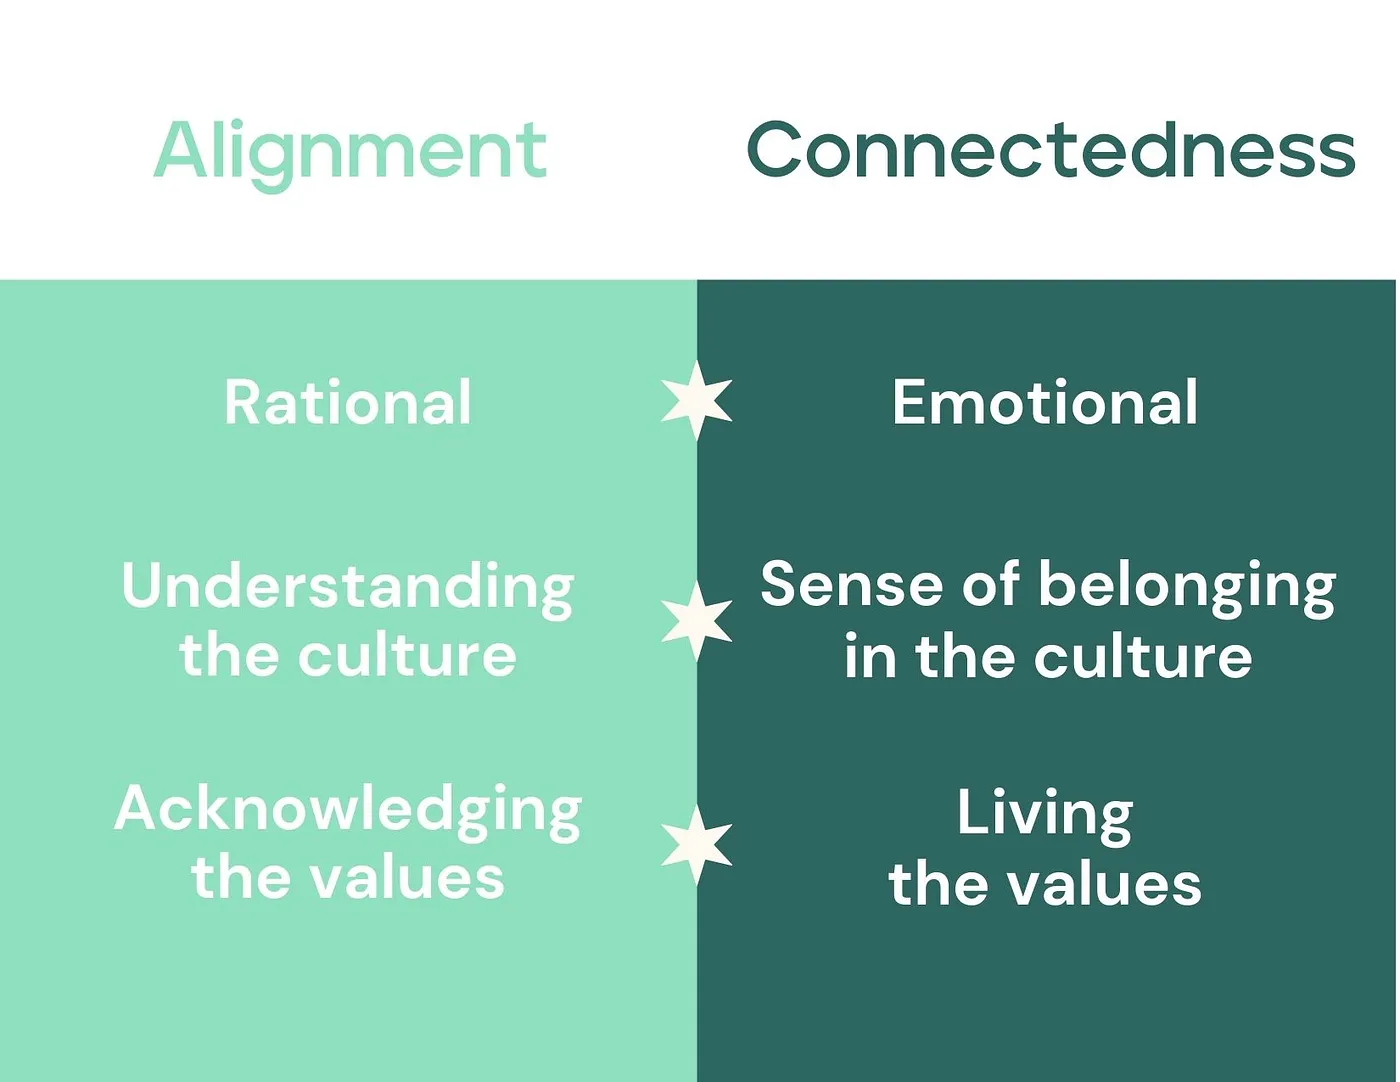 Being emotionally connected to the mission statements and values of the company matters in order to make natural connections with employers and top leaders of the company, and to strengthen workplaces.